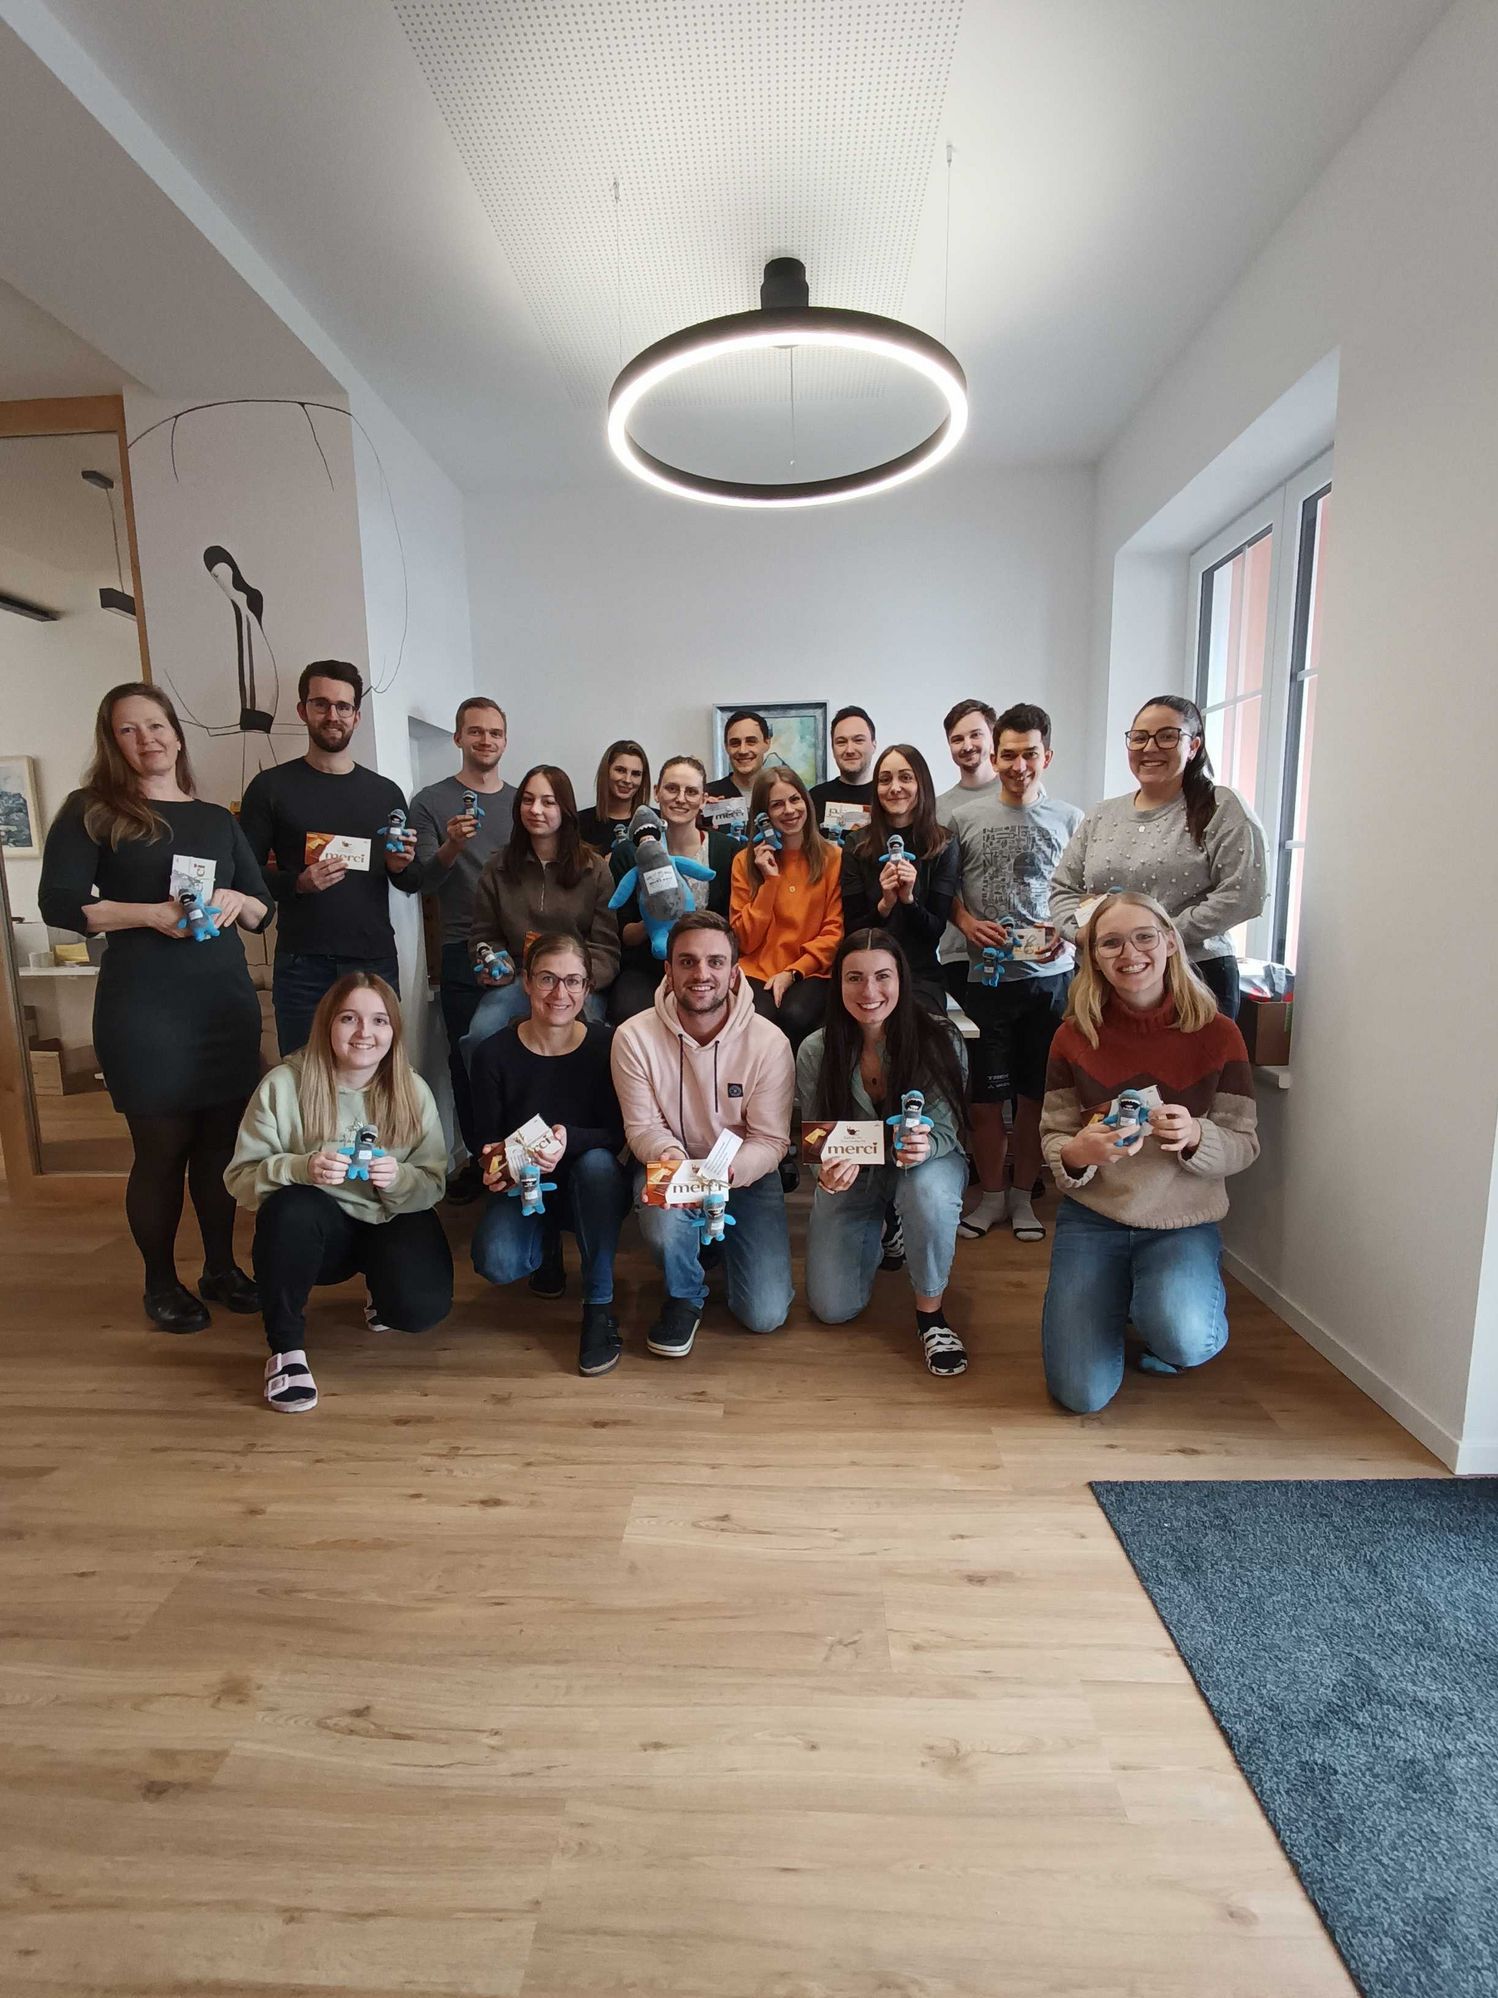 The WS team members present the personalised gift from Fischis Ski School and hold the chocolate bars and Fischis key rings in their hands with a smile.